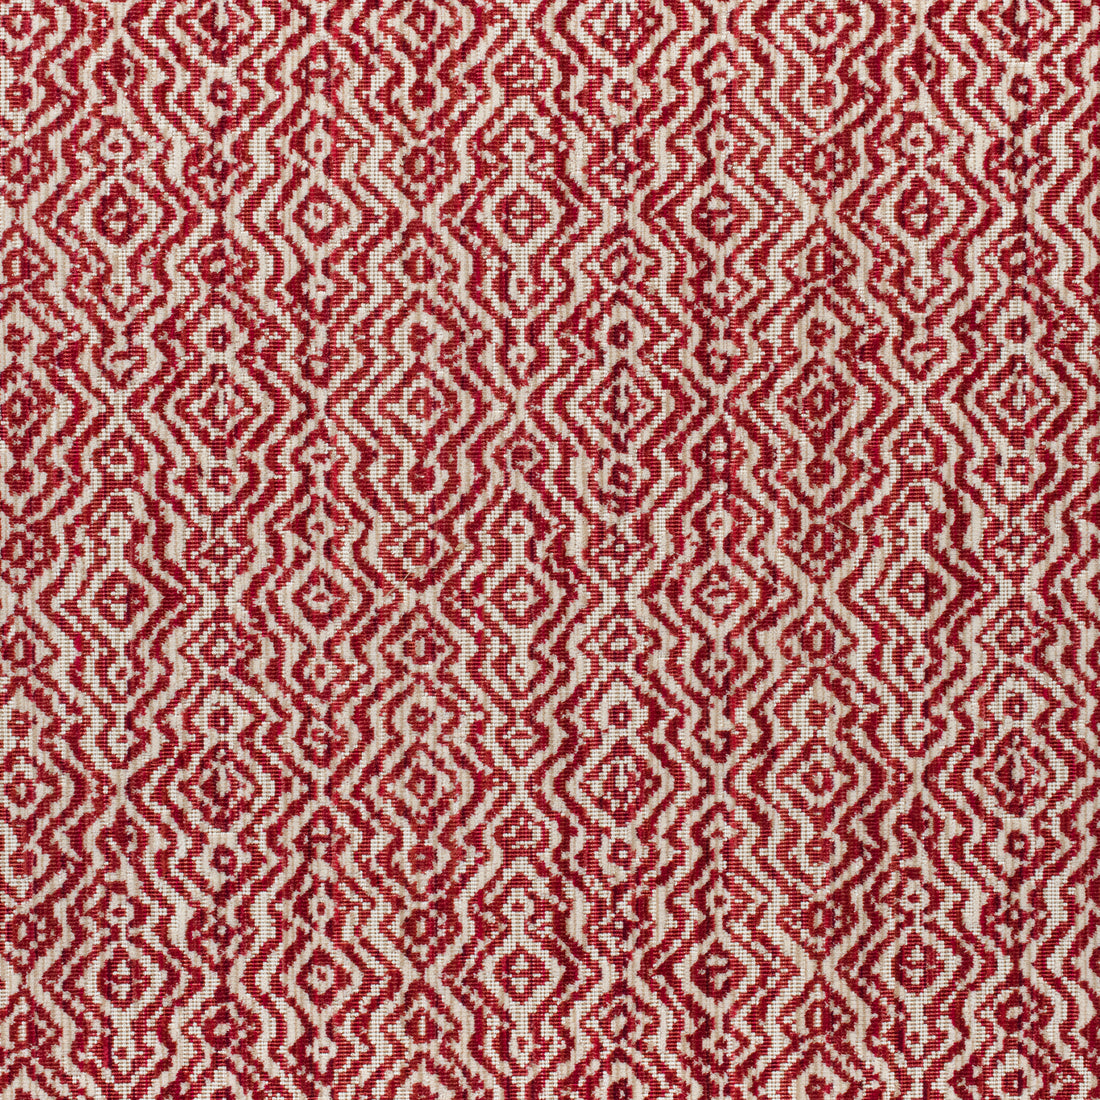 Anastasia fabric in cardinal color - pattern number W80690 - by Thibaut in the Woven Resource 11: Rialto collection